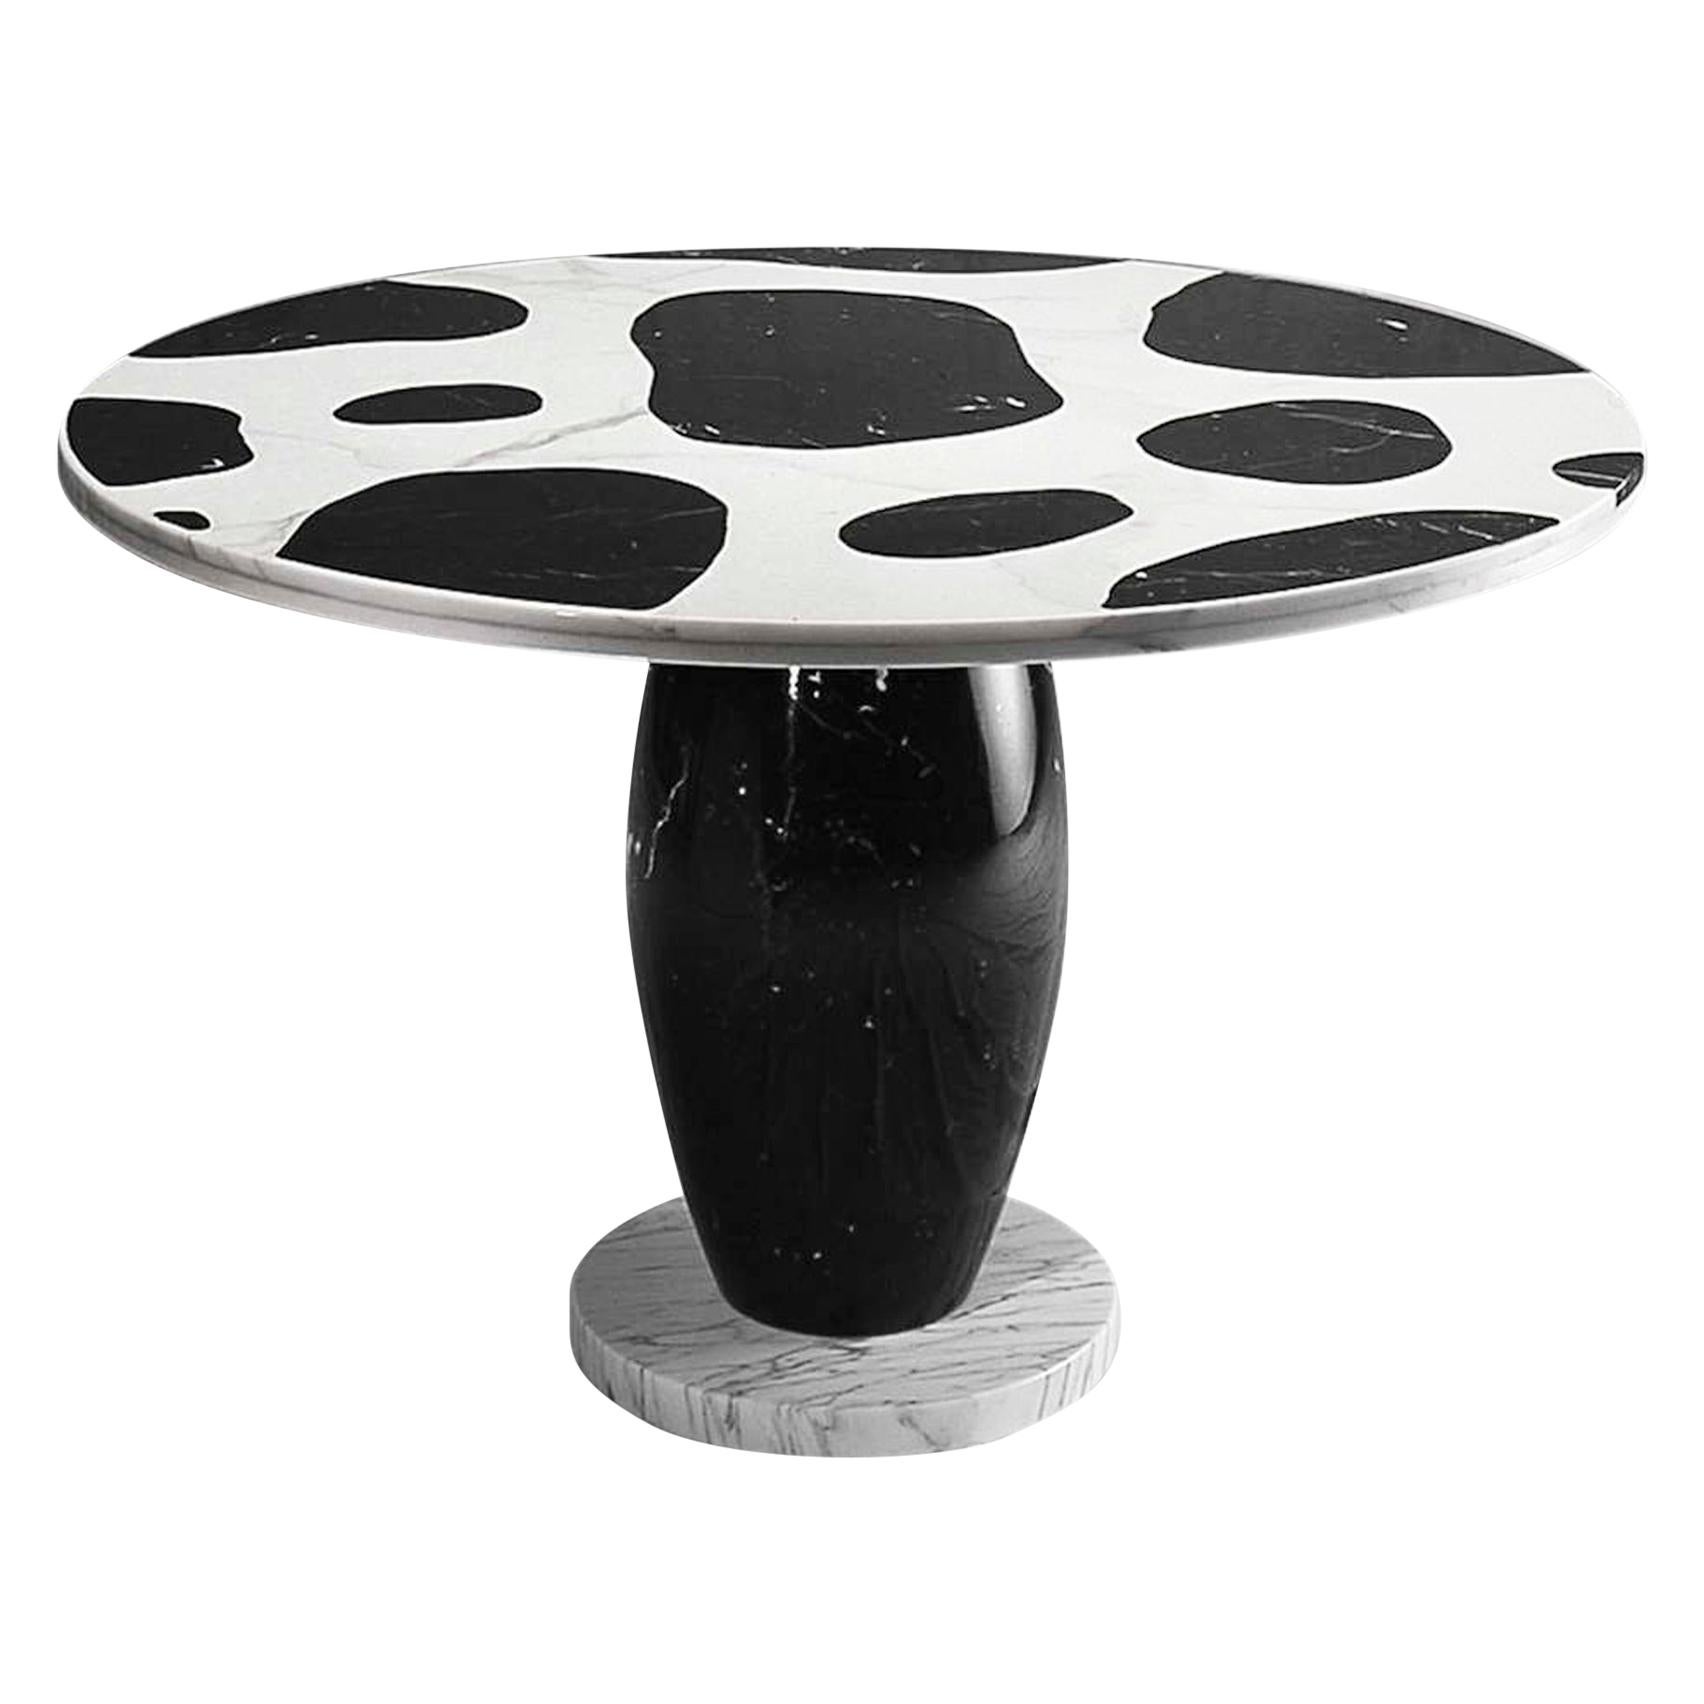 'Kampur' Round Dining Table in Marble, by Michele de Lucchi